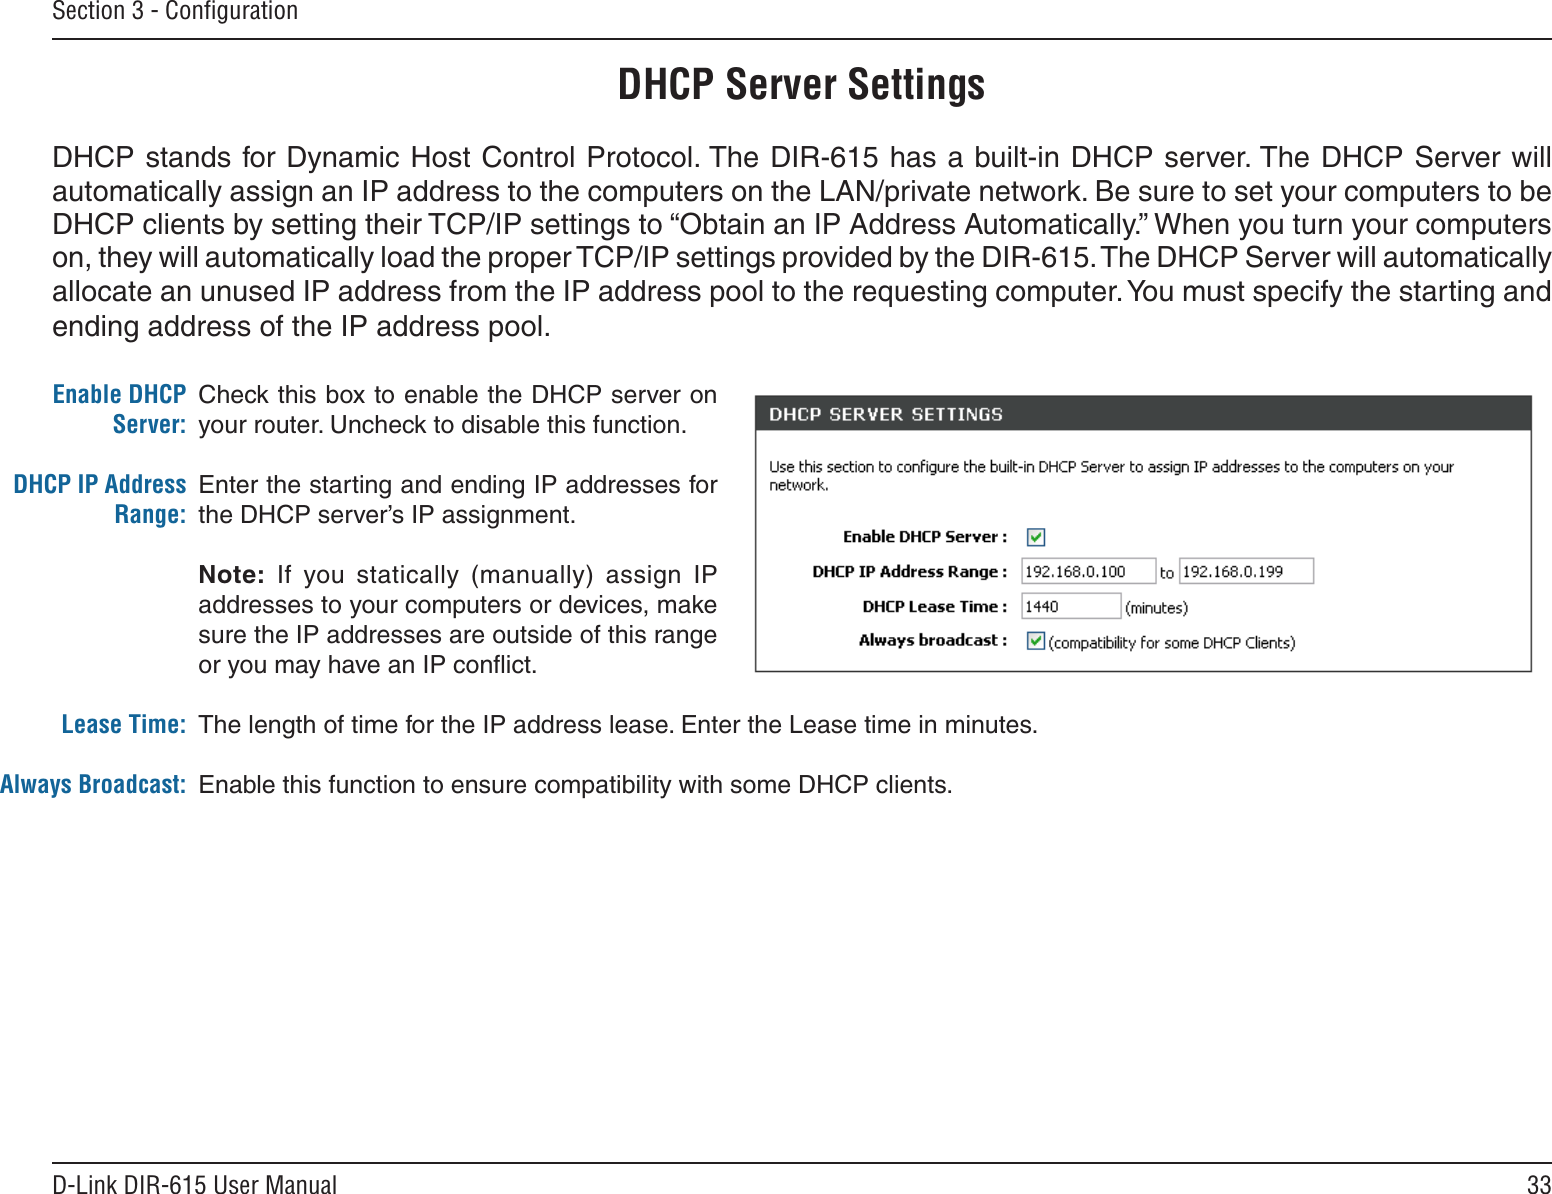 33D-Link DIR-615 User ManualSection 3 - ConﬁgurationCheck this box to enable the DHCP server on your router. Uncheck to disable this function.Enter the starting and ending IP addresses for the DHCP server’s IP assignment.Note:  If  you  statically  (manually)  assign  IP addresses to your computers or devices, make sure the IP addresses are outside of this range or you may have an IP conﬂict. The length of time for the IP address lease. Enter the Lease time in minutes.Enable this function to ensure compatibility with some DHCP clients.Enable DHCP Server:DHCP IP Address Range:Lease Time:Always Broadcast:DHCP Server SettingsDHCP stands for Dynamic Host Control Protocol. The DIR-615 has a built-in DHCP server. The DHCP Server will automatically assign an IP address to the computers on the LAN/private network. Be sure to set your computers to be DHCP clients by setting their TCP/IP settings to “Obtain an IP Address Automatically.” When you turn your computers on, they will automatically load the proper TCP/IP settings provided by the DIR-615. The DHCP Server will automatically allocate an unused IP address from the IP address pool to the requesting computer. You must specify the starting and ending address of the IP address pool.